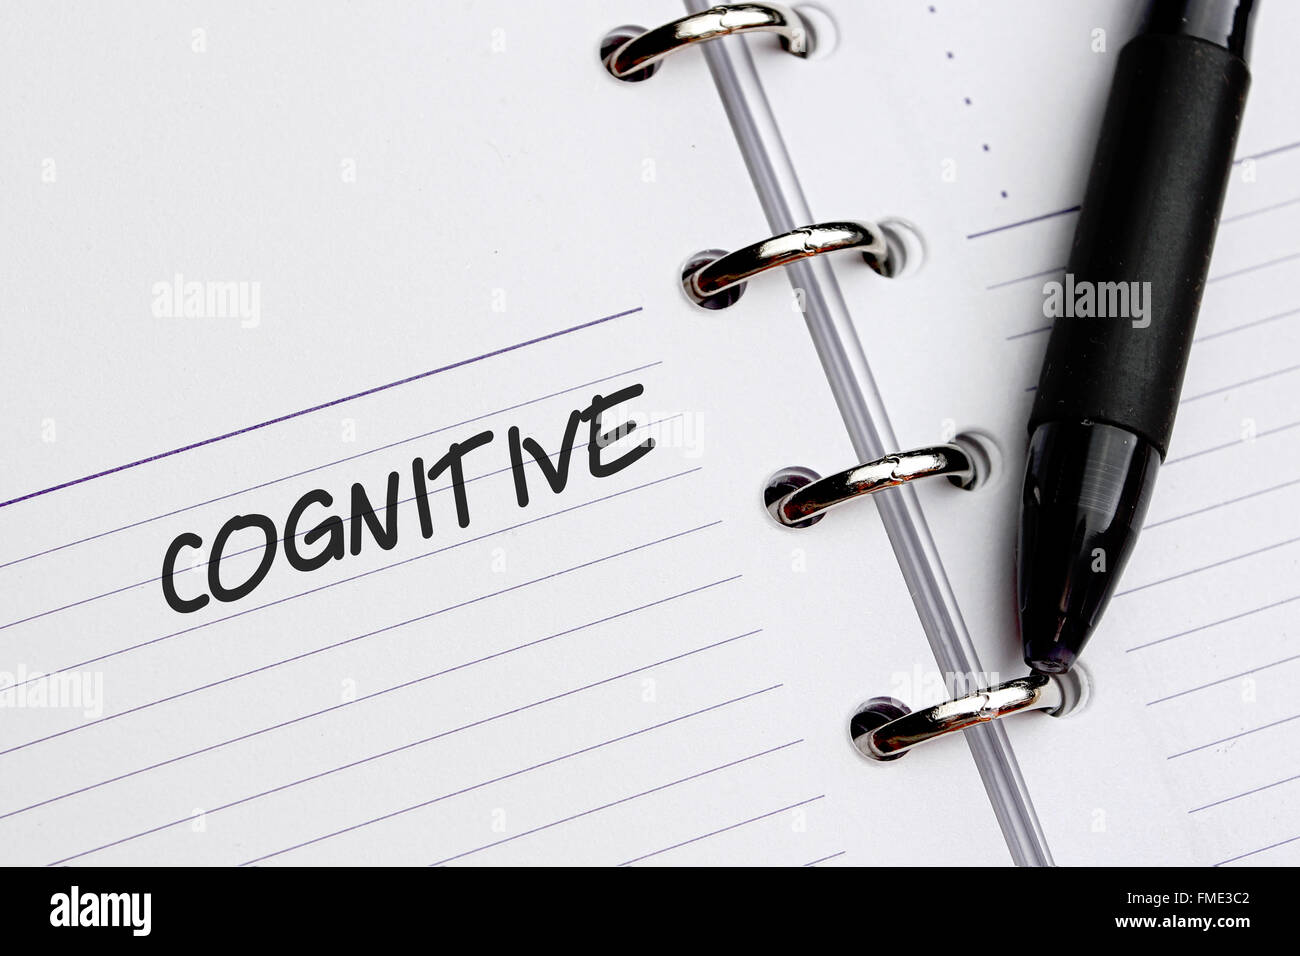 Cognitive word written on paper Stock Photo